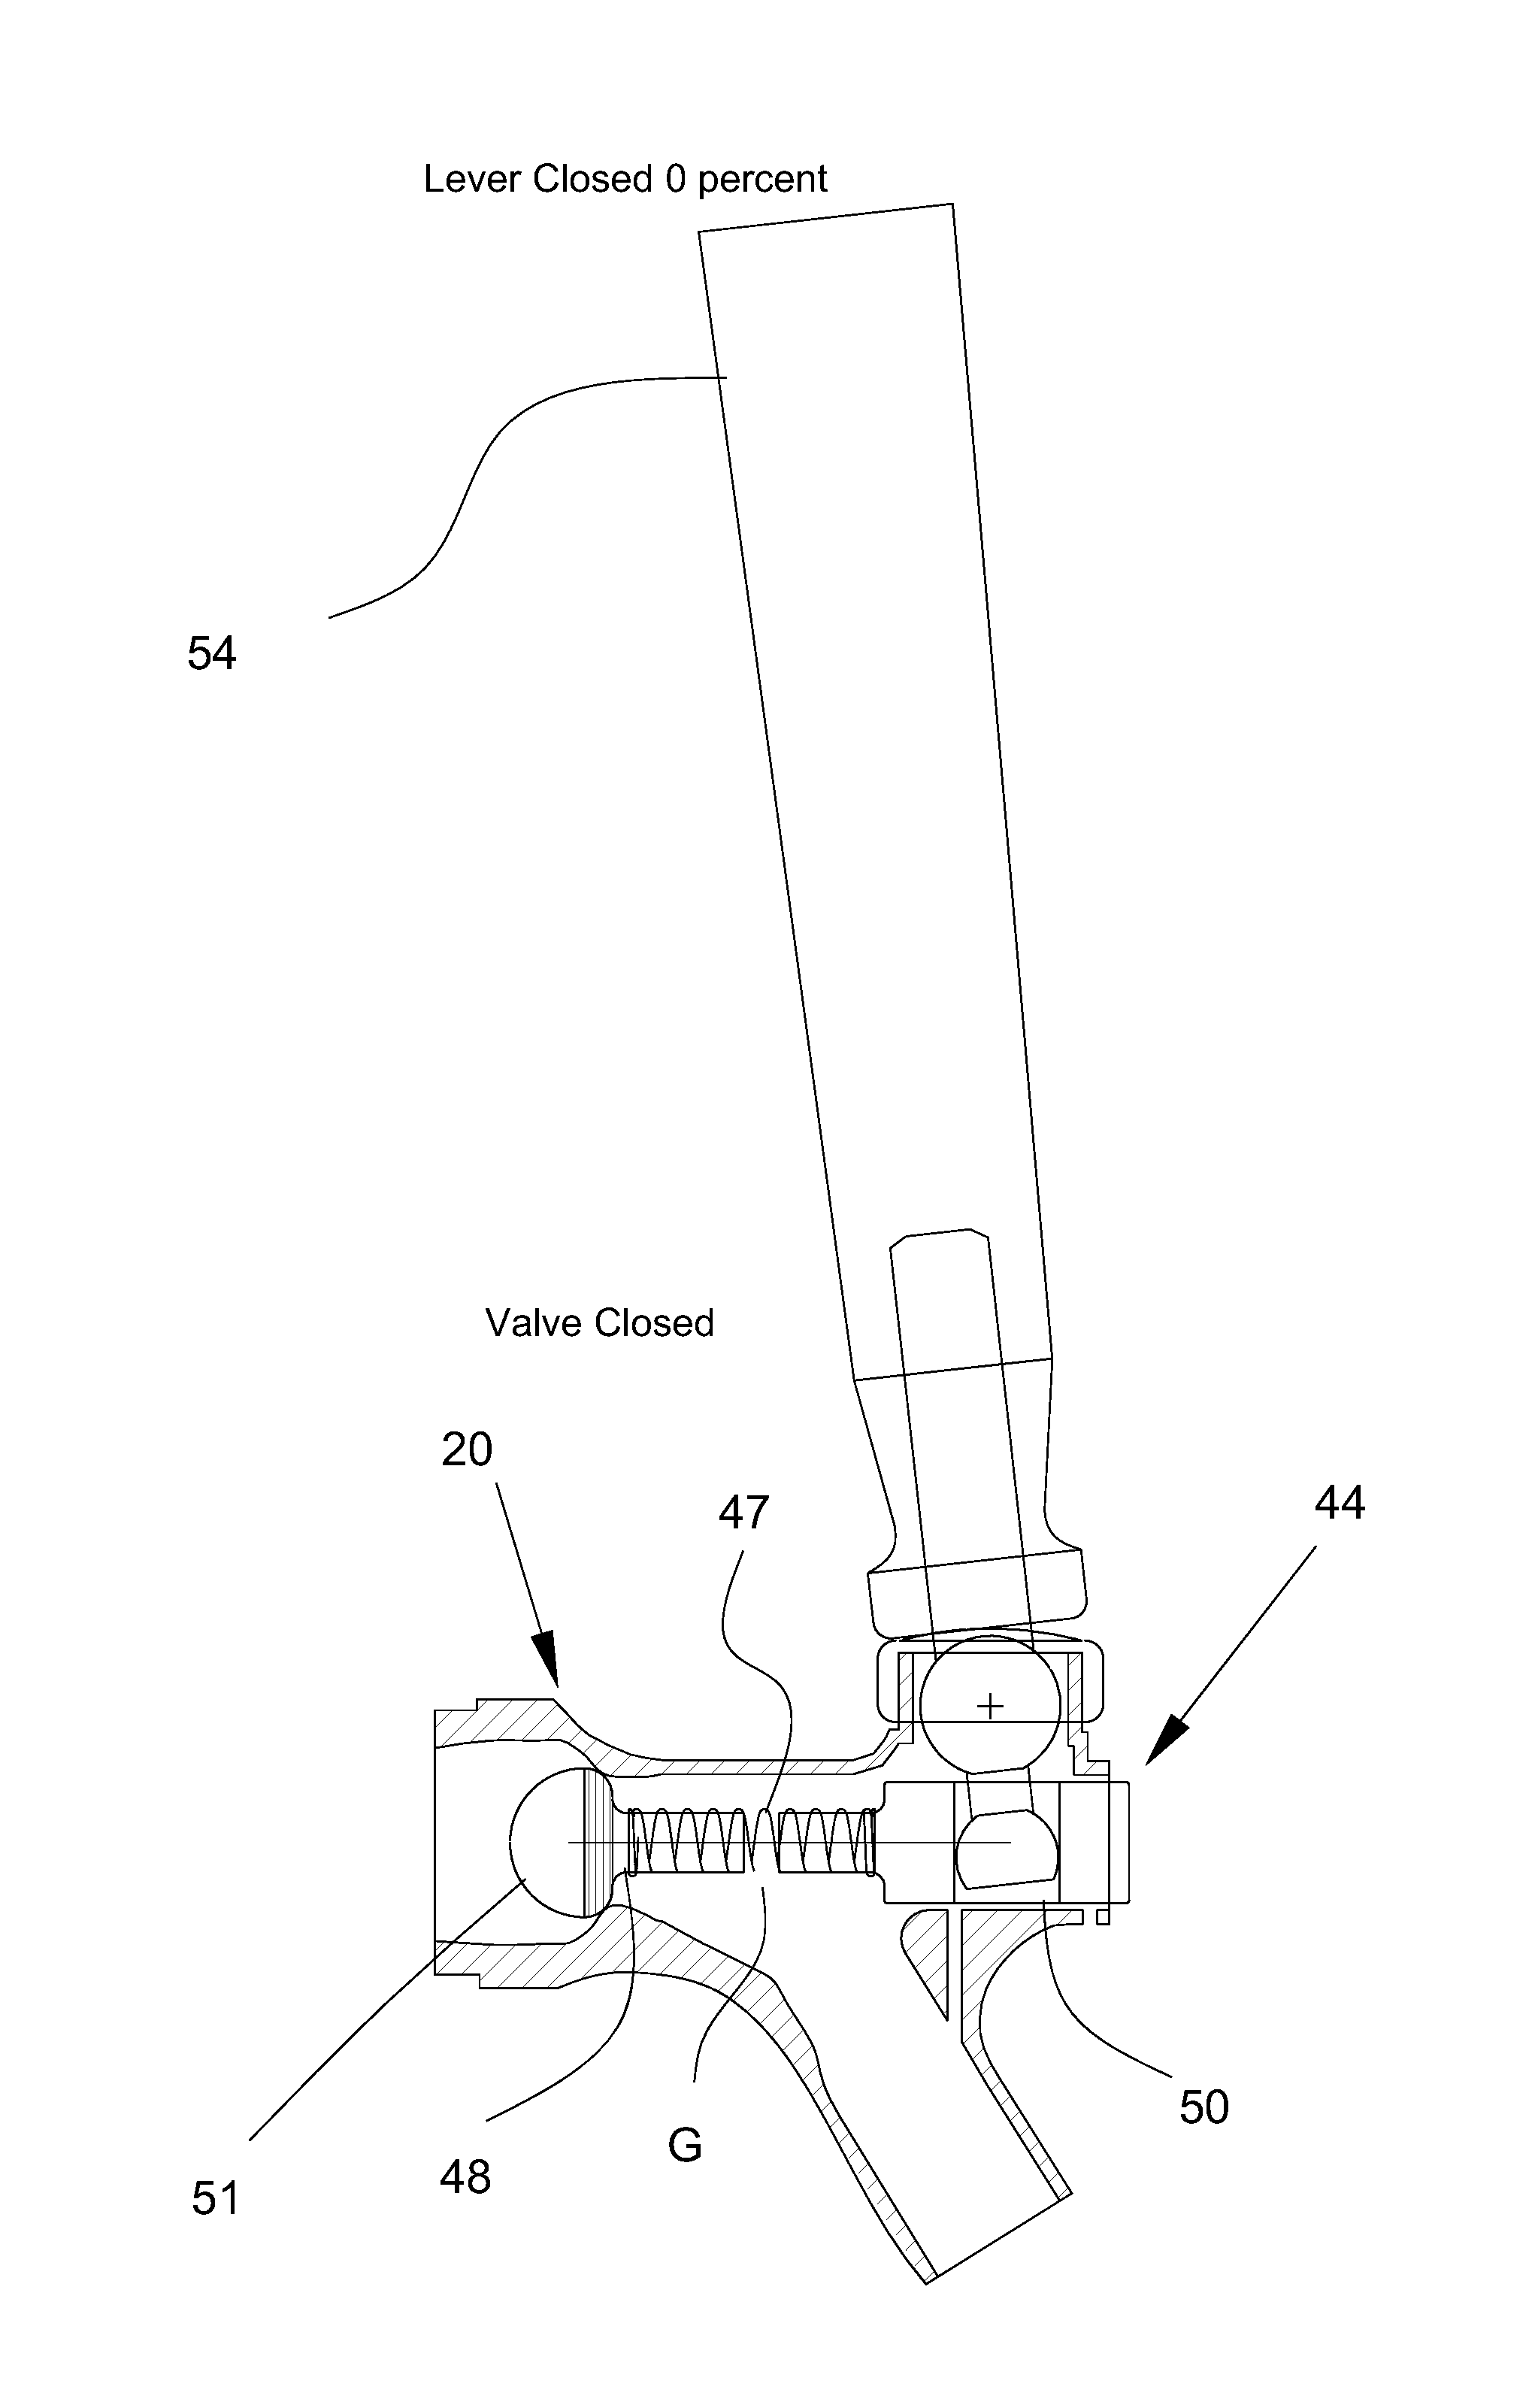 Beverage dispensing system with apparatus for controlling foaming and flow rate